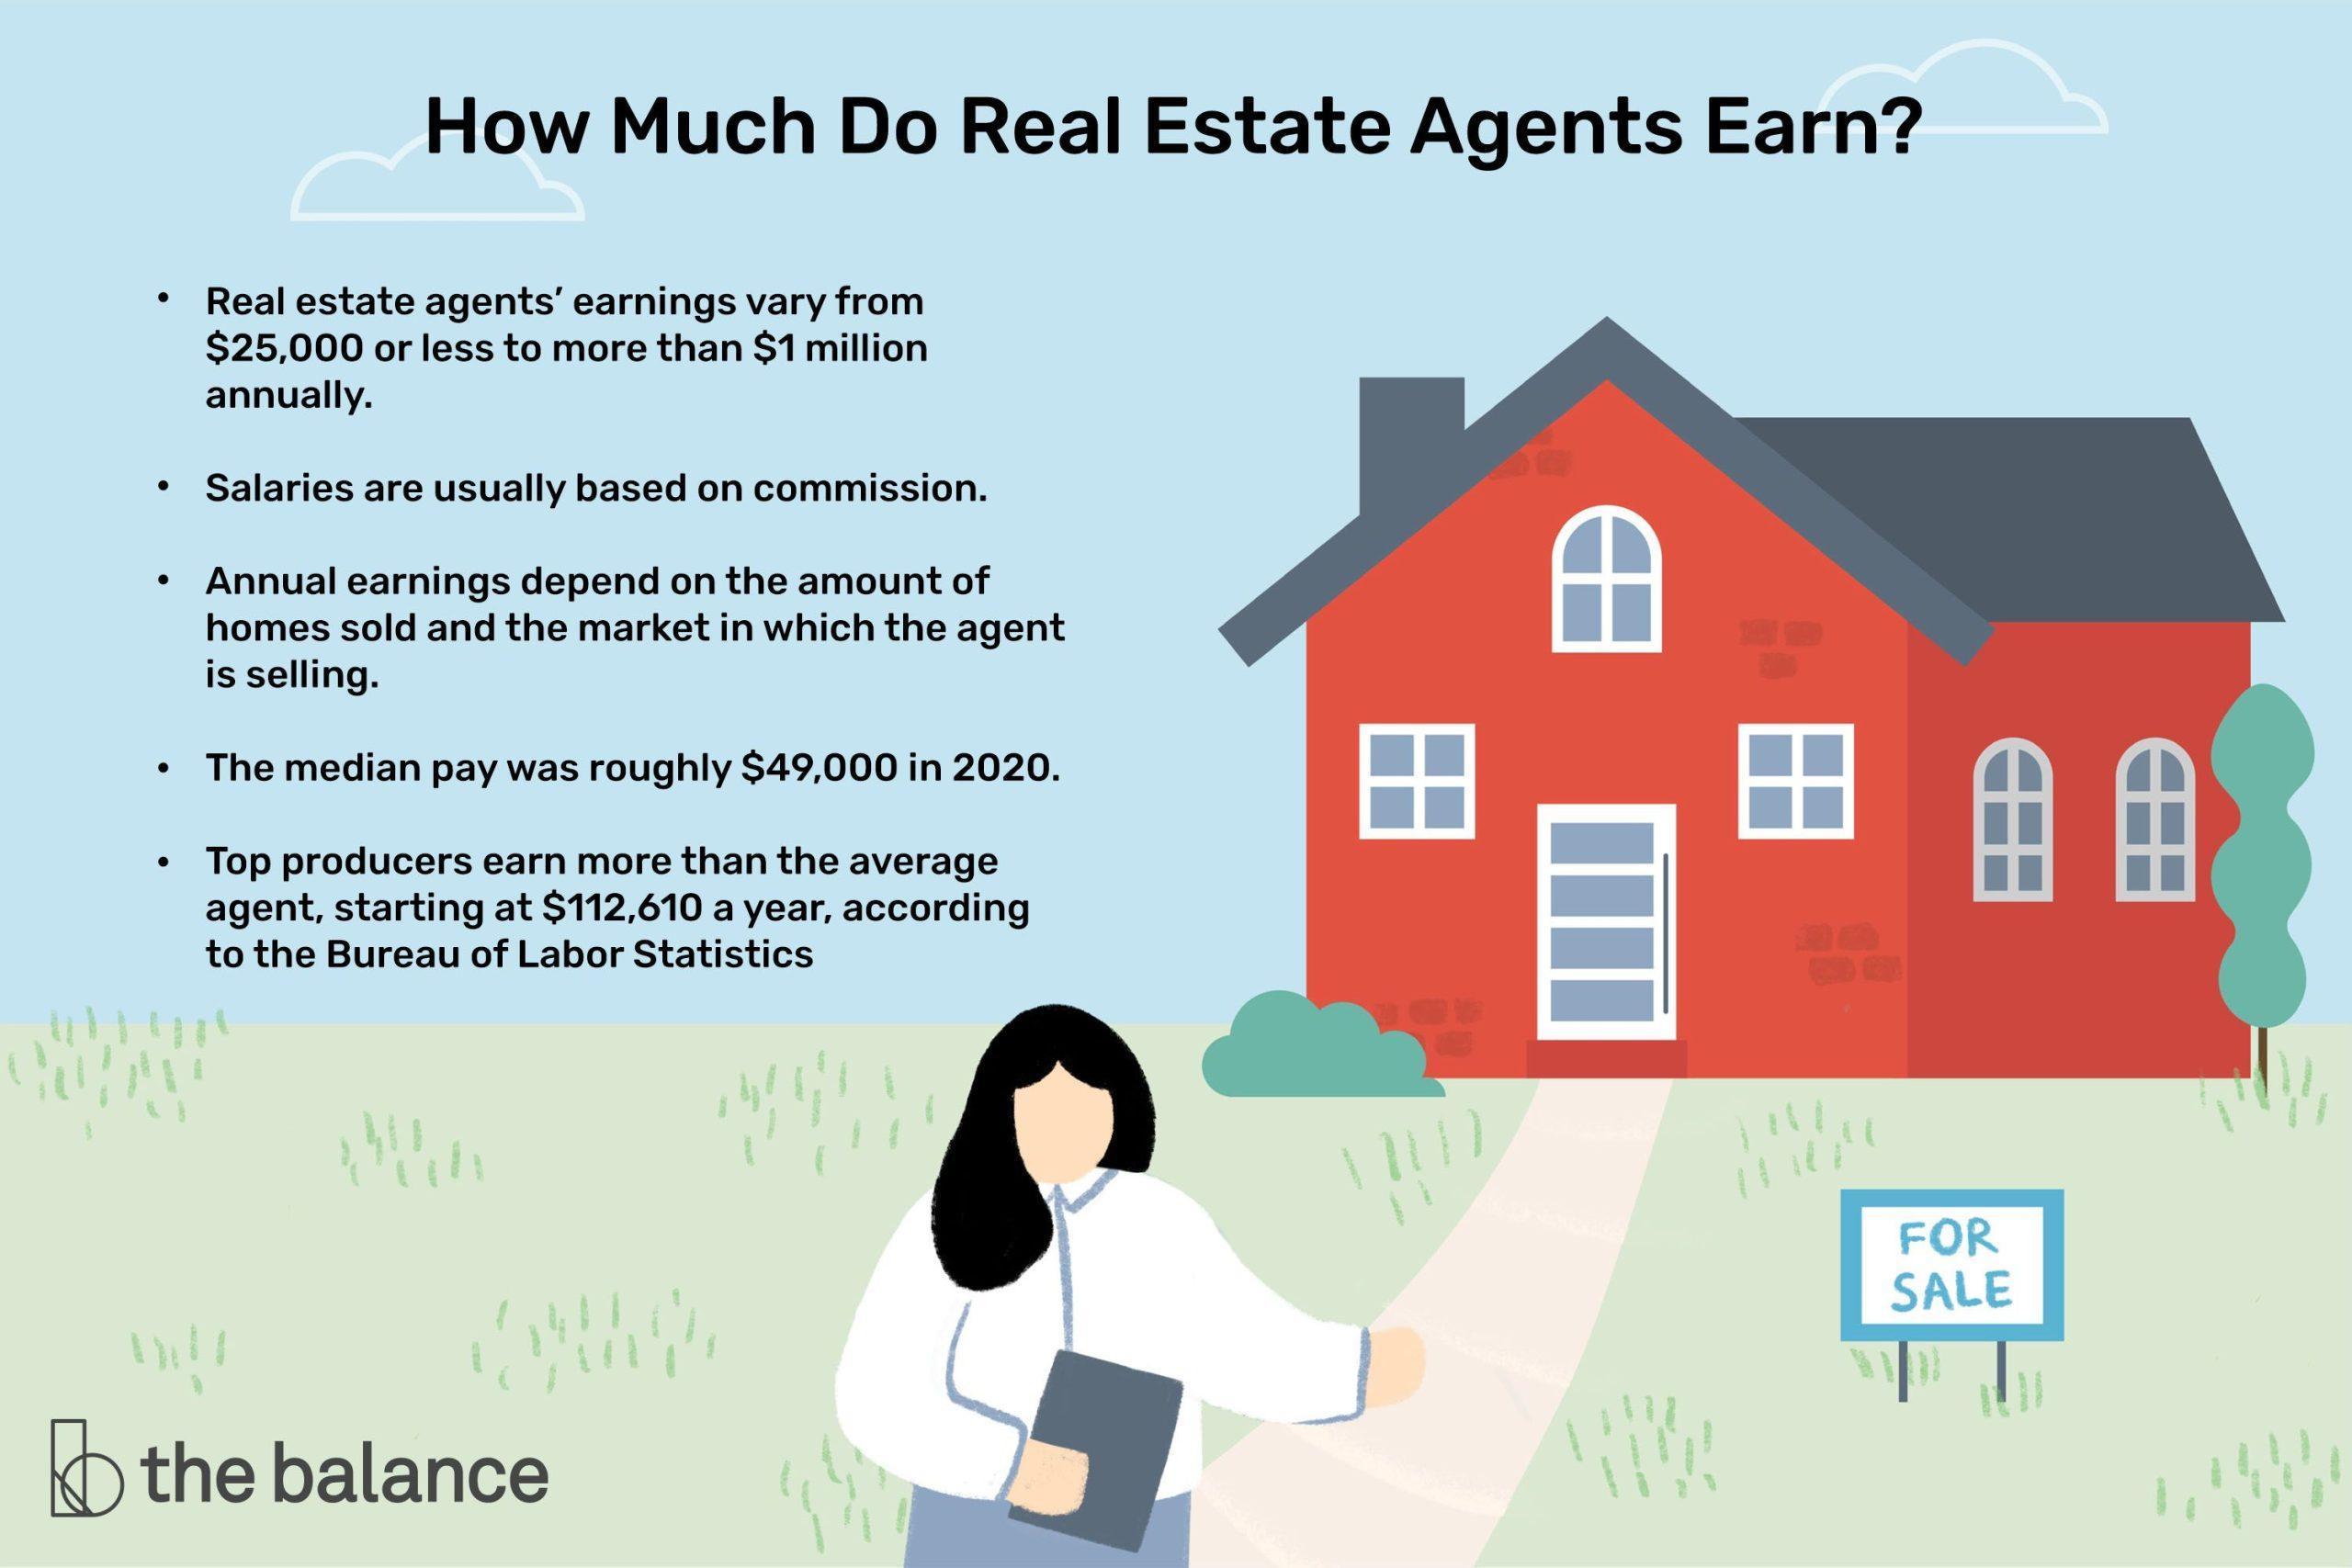 how much is real estate agent tuition fee